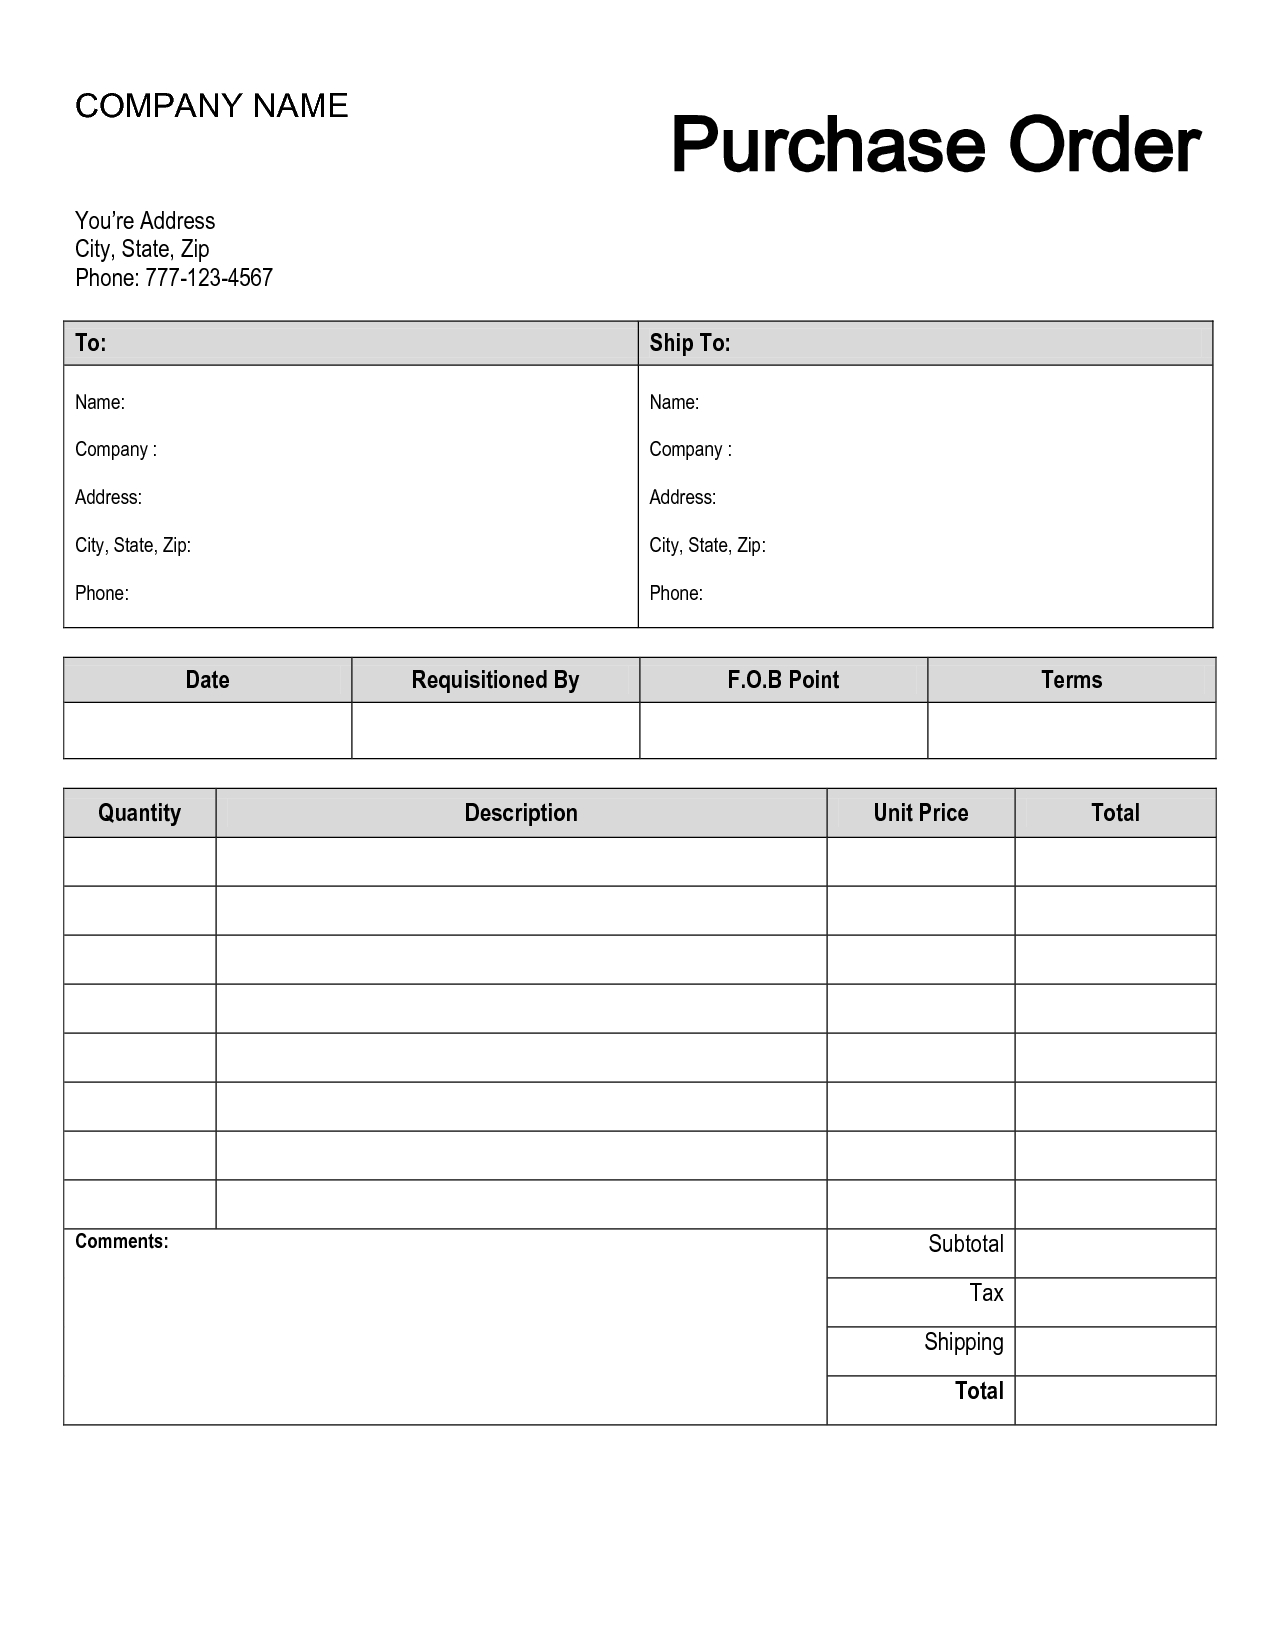 Free Printable Purchase Order Form | Purchase Order | Shop | Order - Free Printable Business Credit Application Form